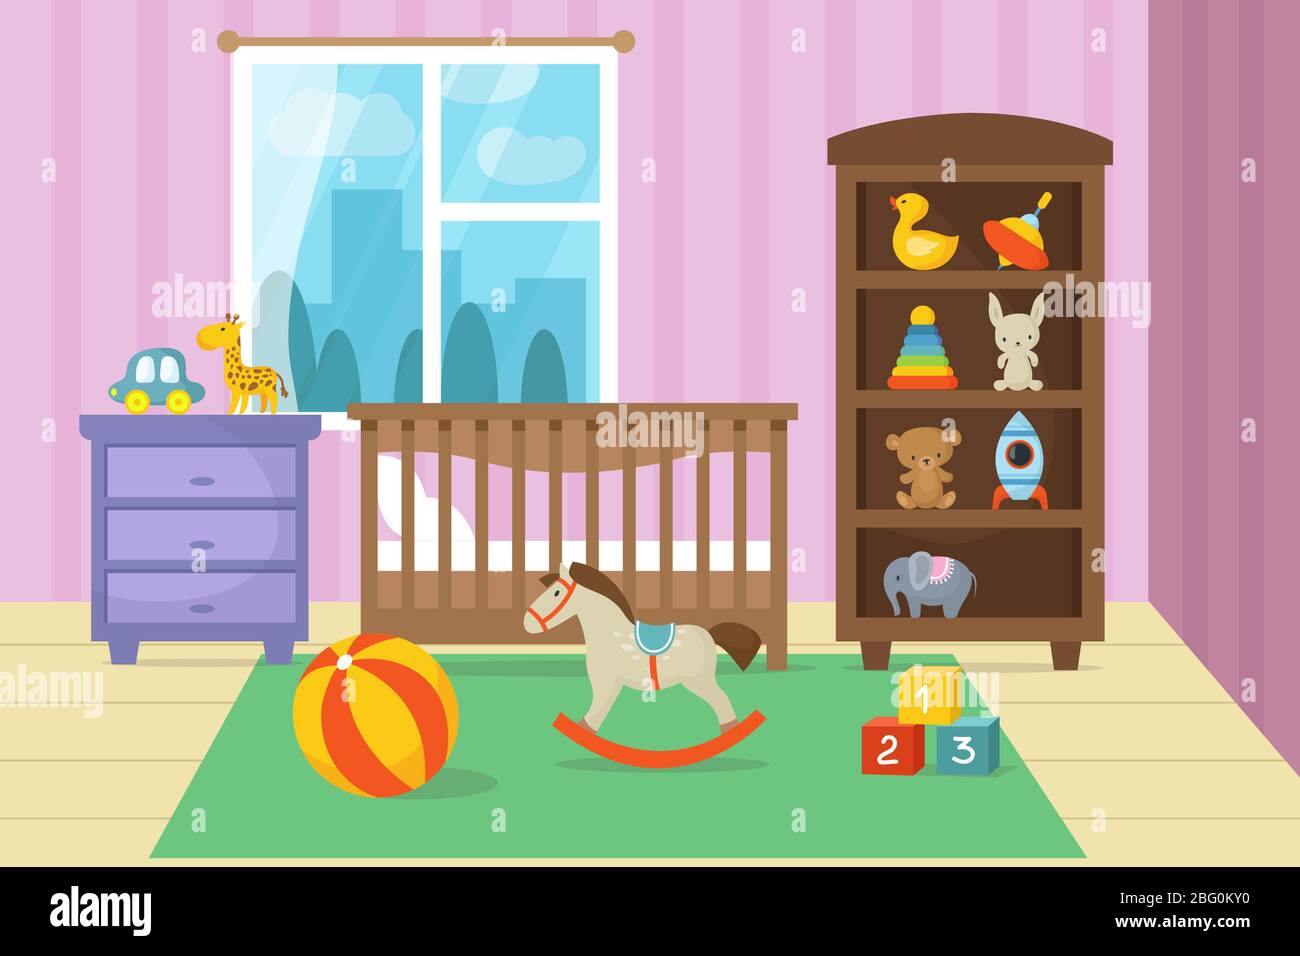 Cartoon Childrens Room Interior With Kid Toys Vector Illustration Bedroom Child Playroom Cartoon With Bed And Toys Stock Vector Image Art Alamy